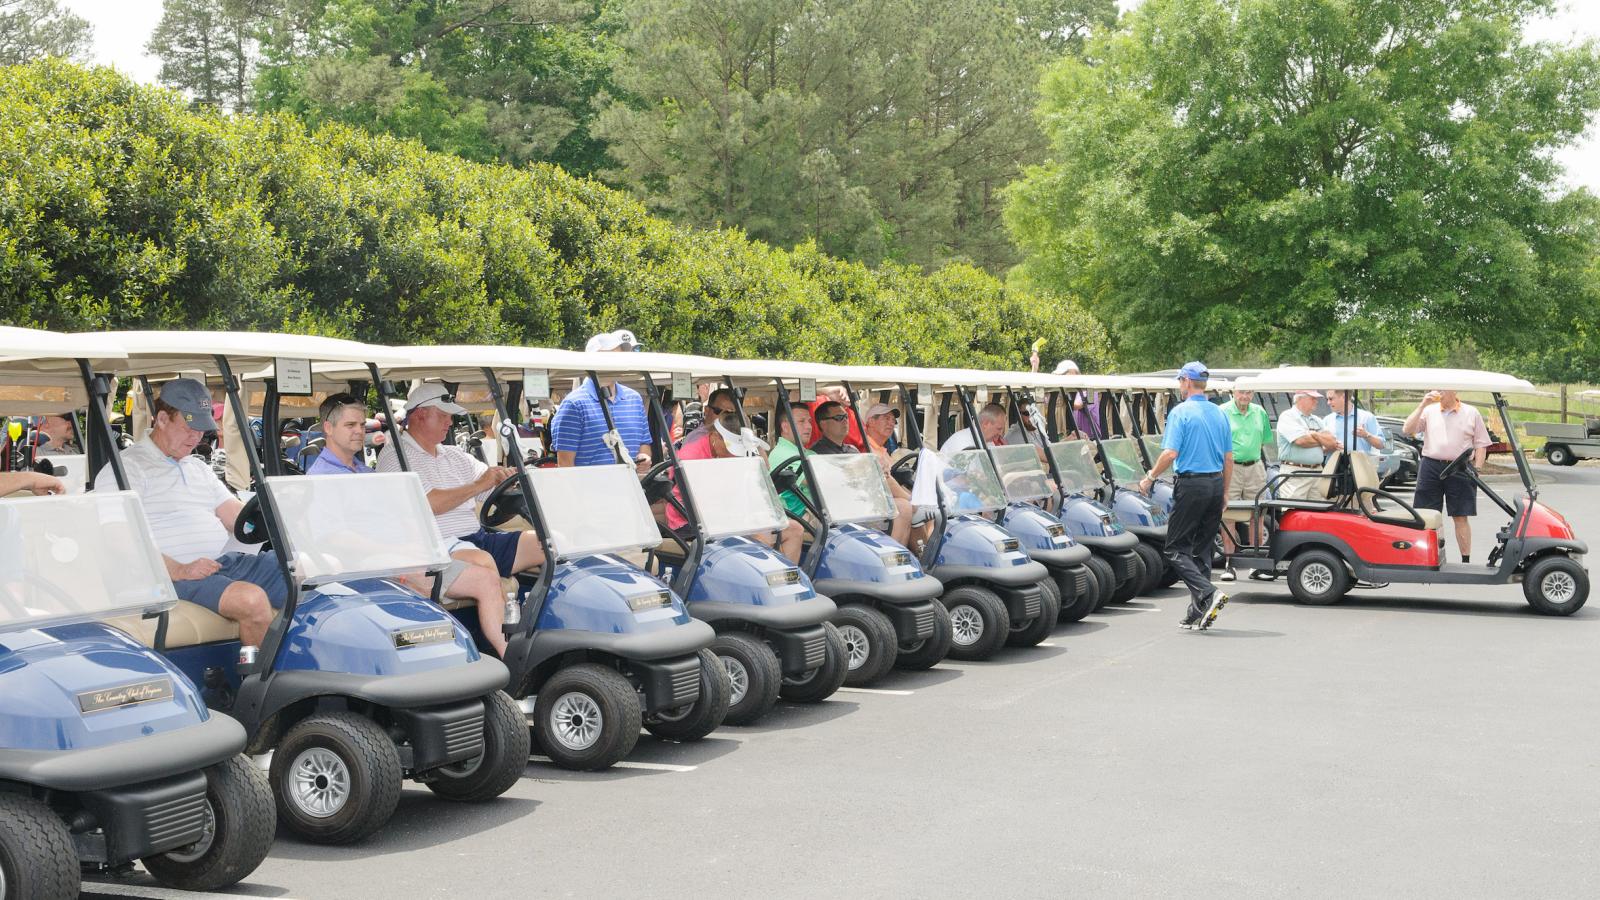 Golf carts lined up at the Harper's Hope tournament